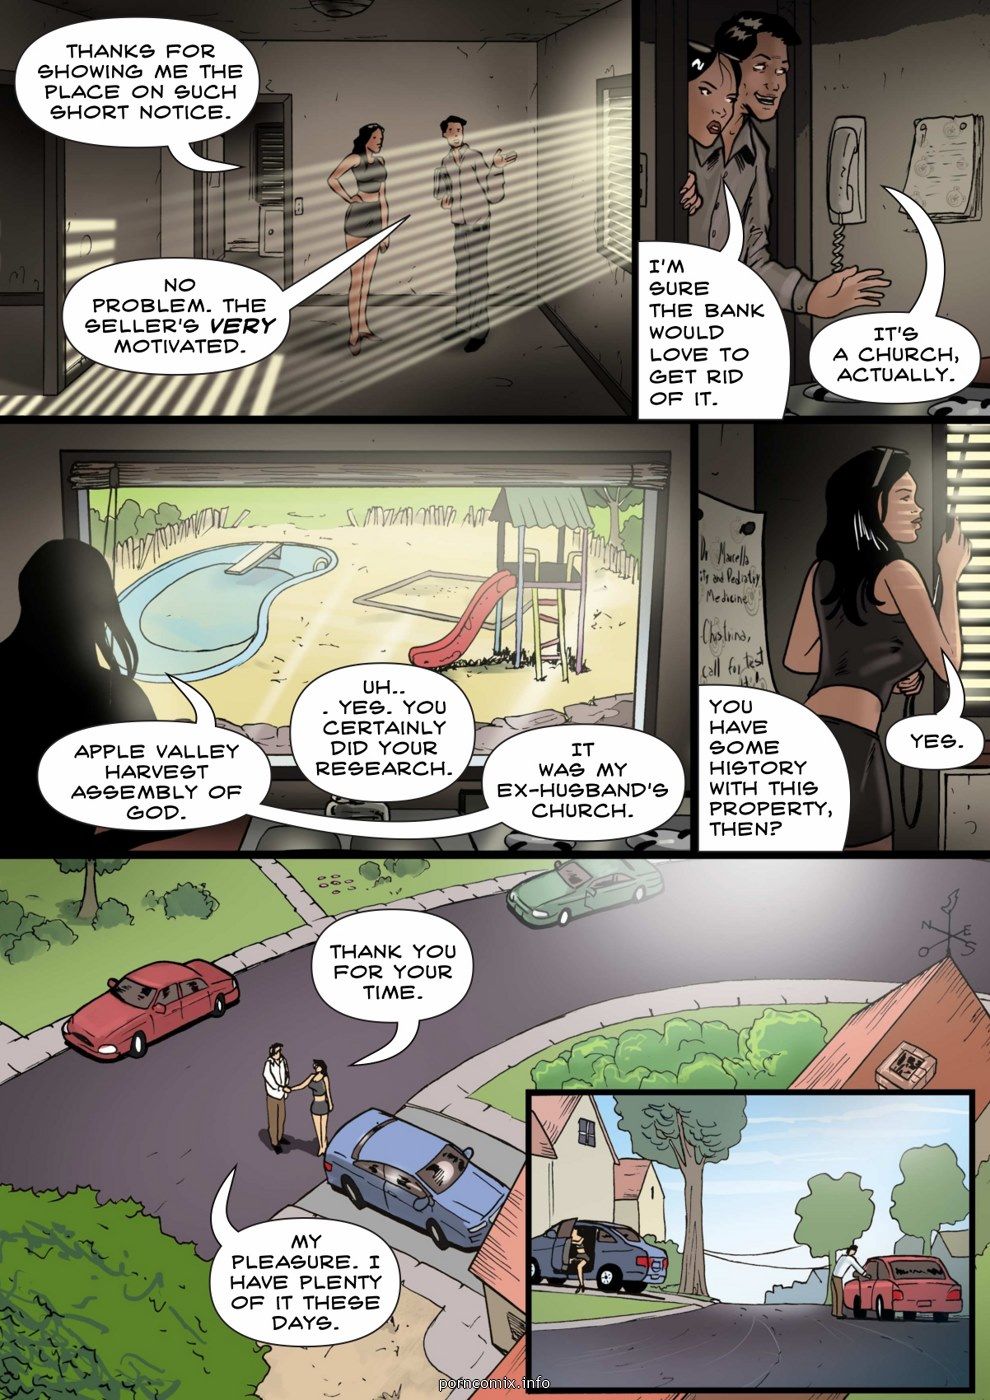 Mind Control - Checkered Past Online page 12